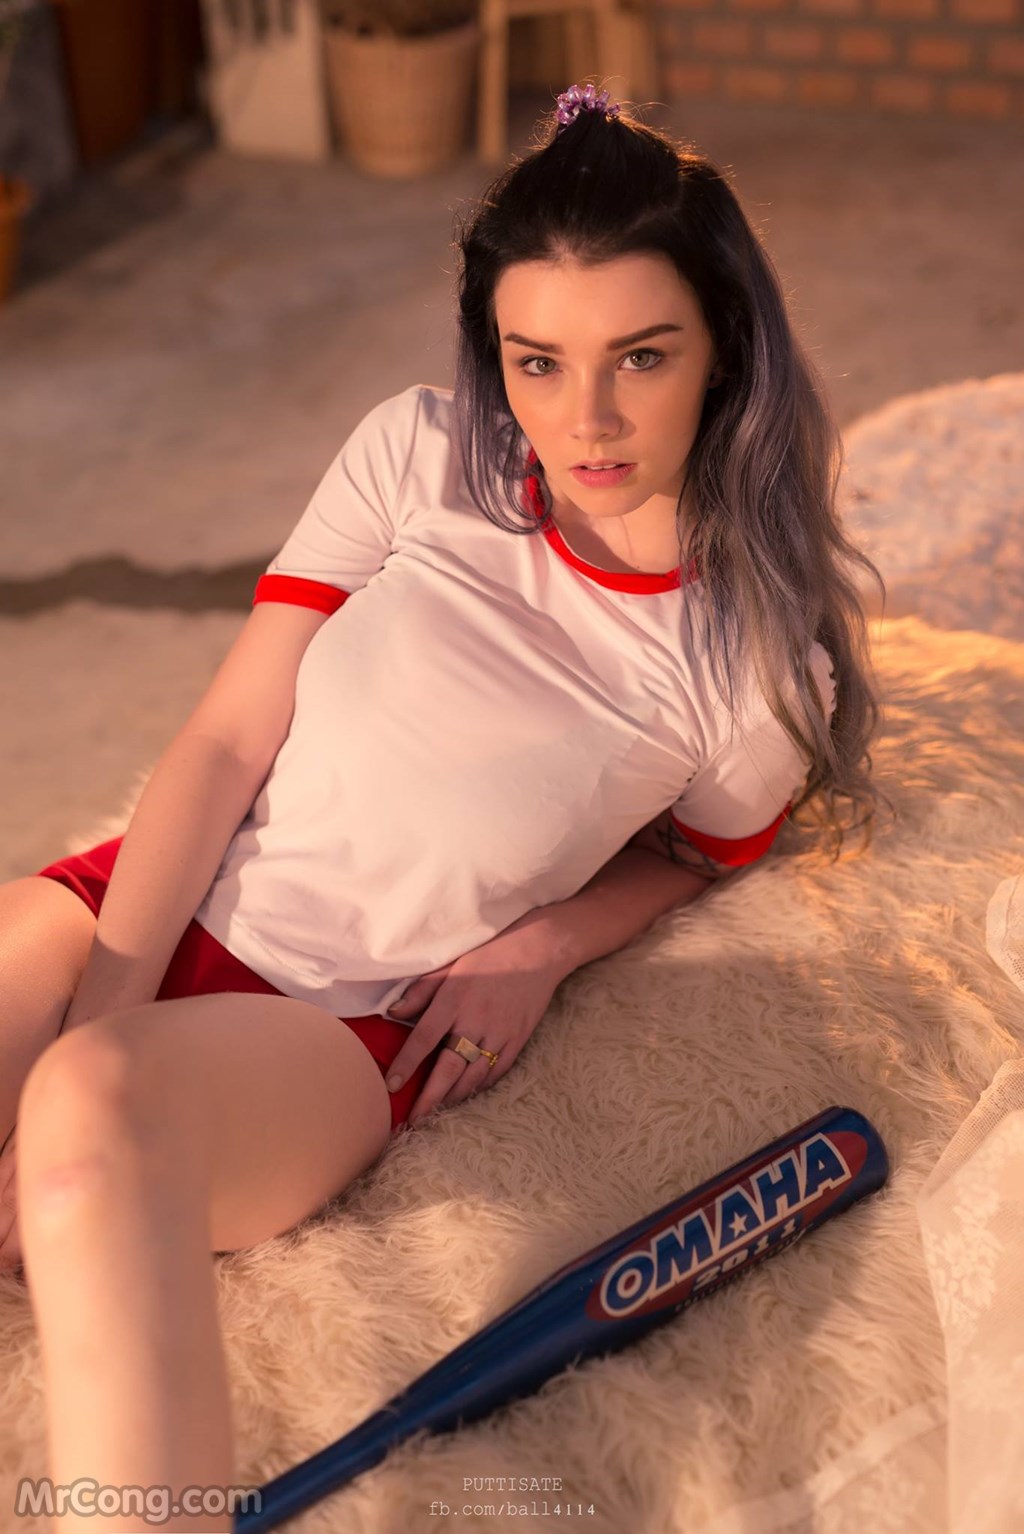 Young Jessie Vard shows off her beauty in sports outfit (8 pictures)